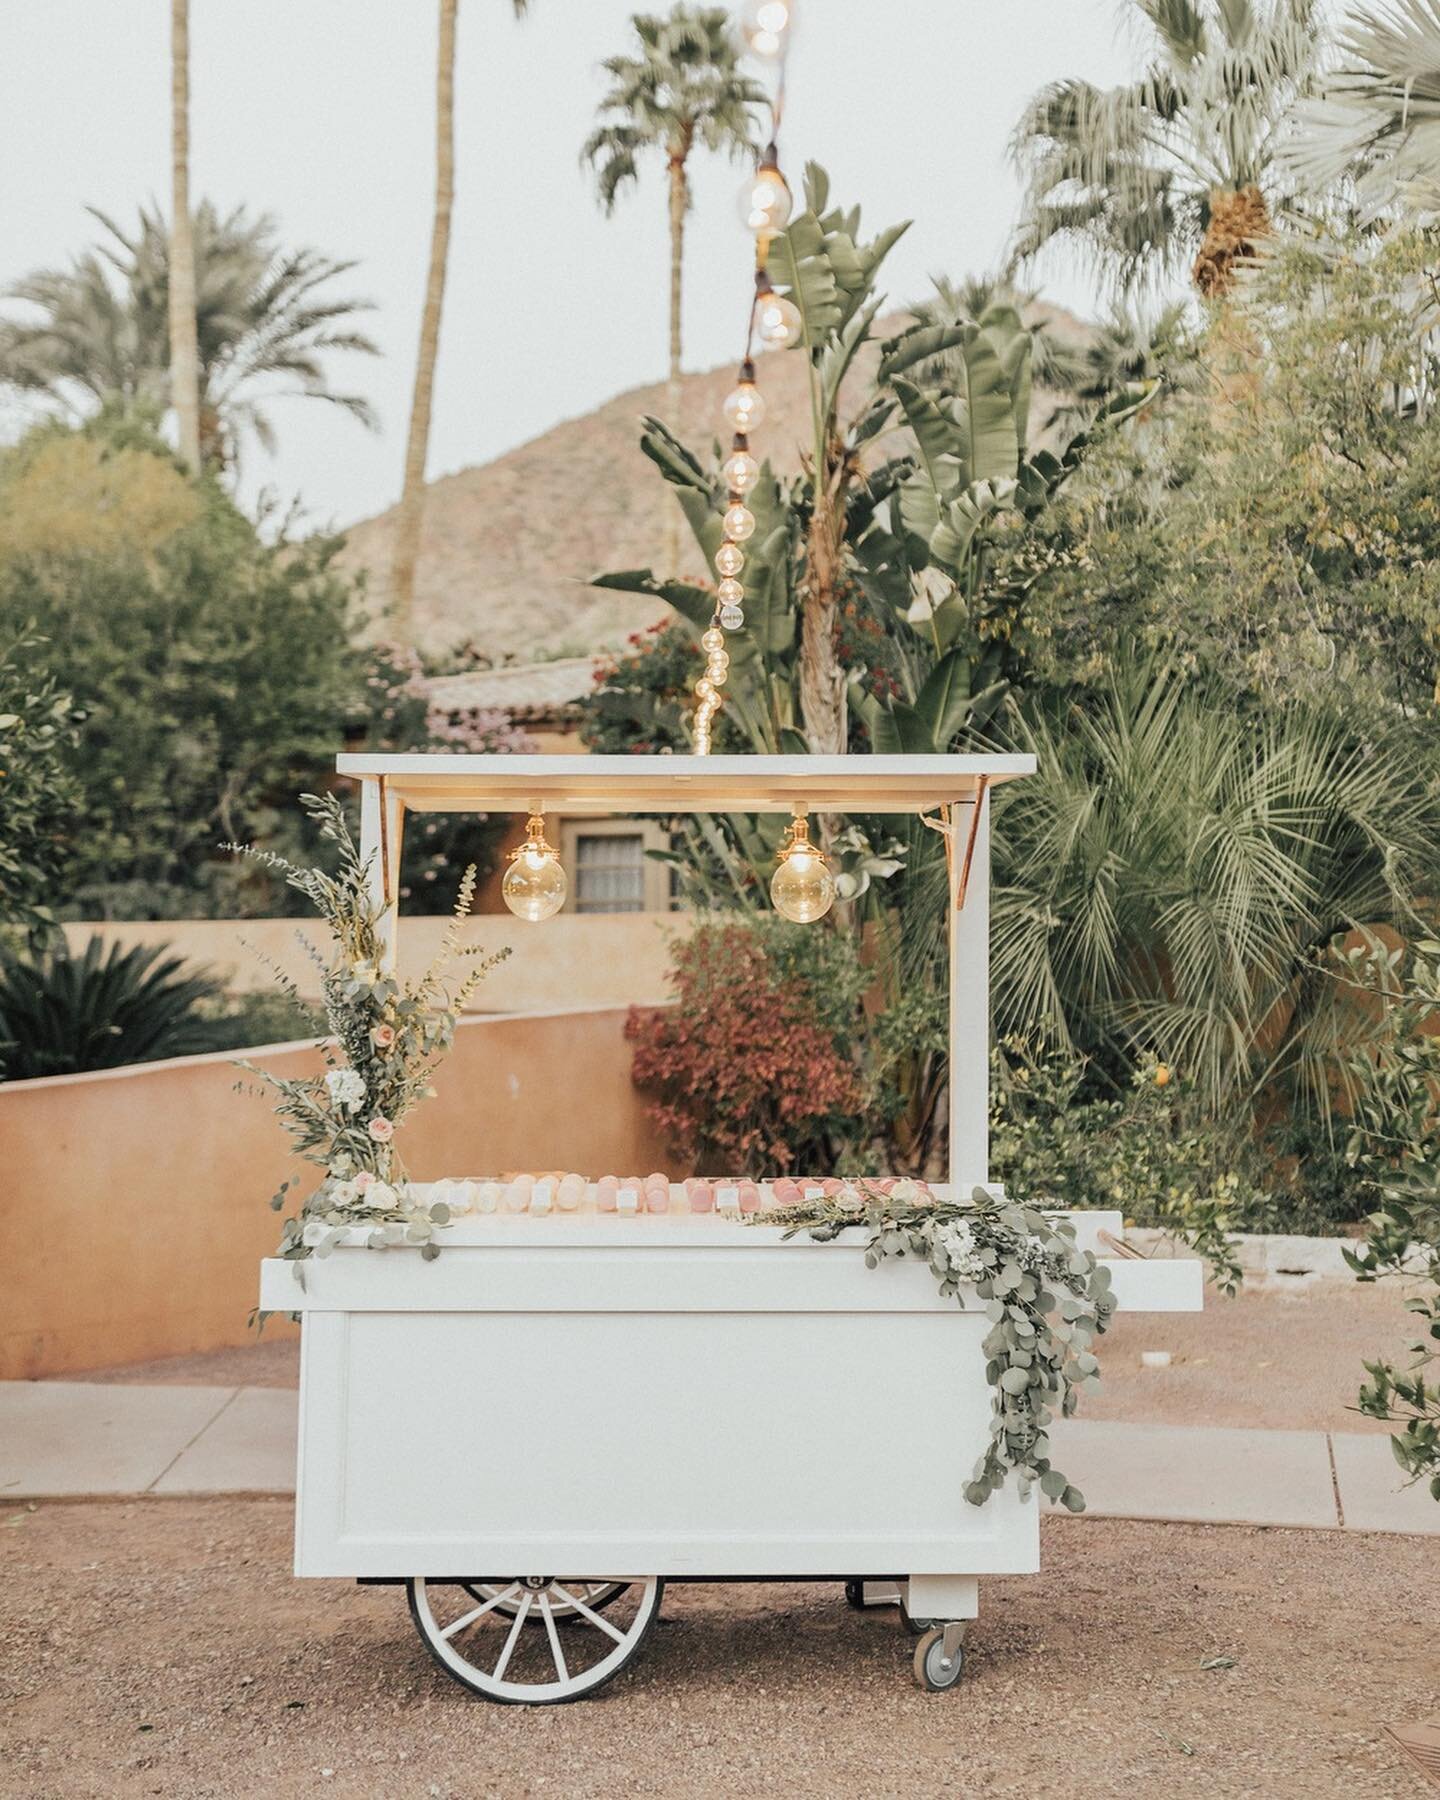 Who doesn&rsquo;t love a cute cart? Ice cream cart? Coffee cart? Champagne cart? Cotten candy cart?! We love it all! Swipe to see our newest rental addition. Just needs some love to make it wedding ready ✨